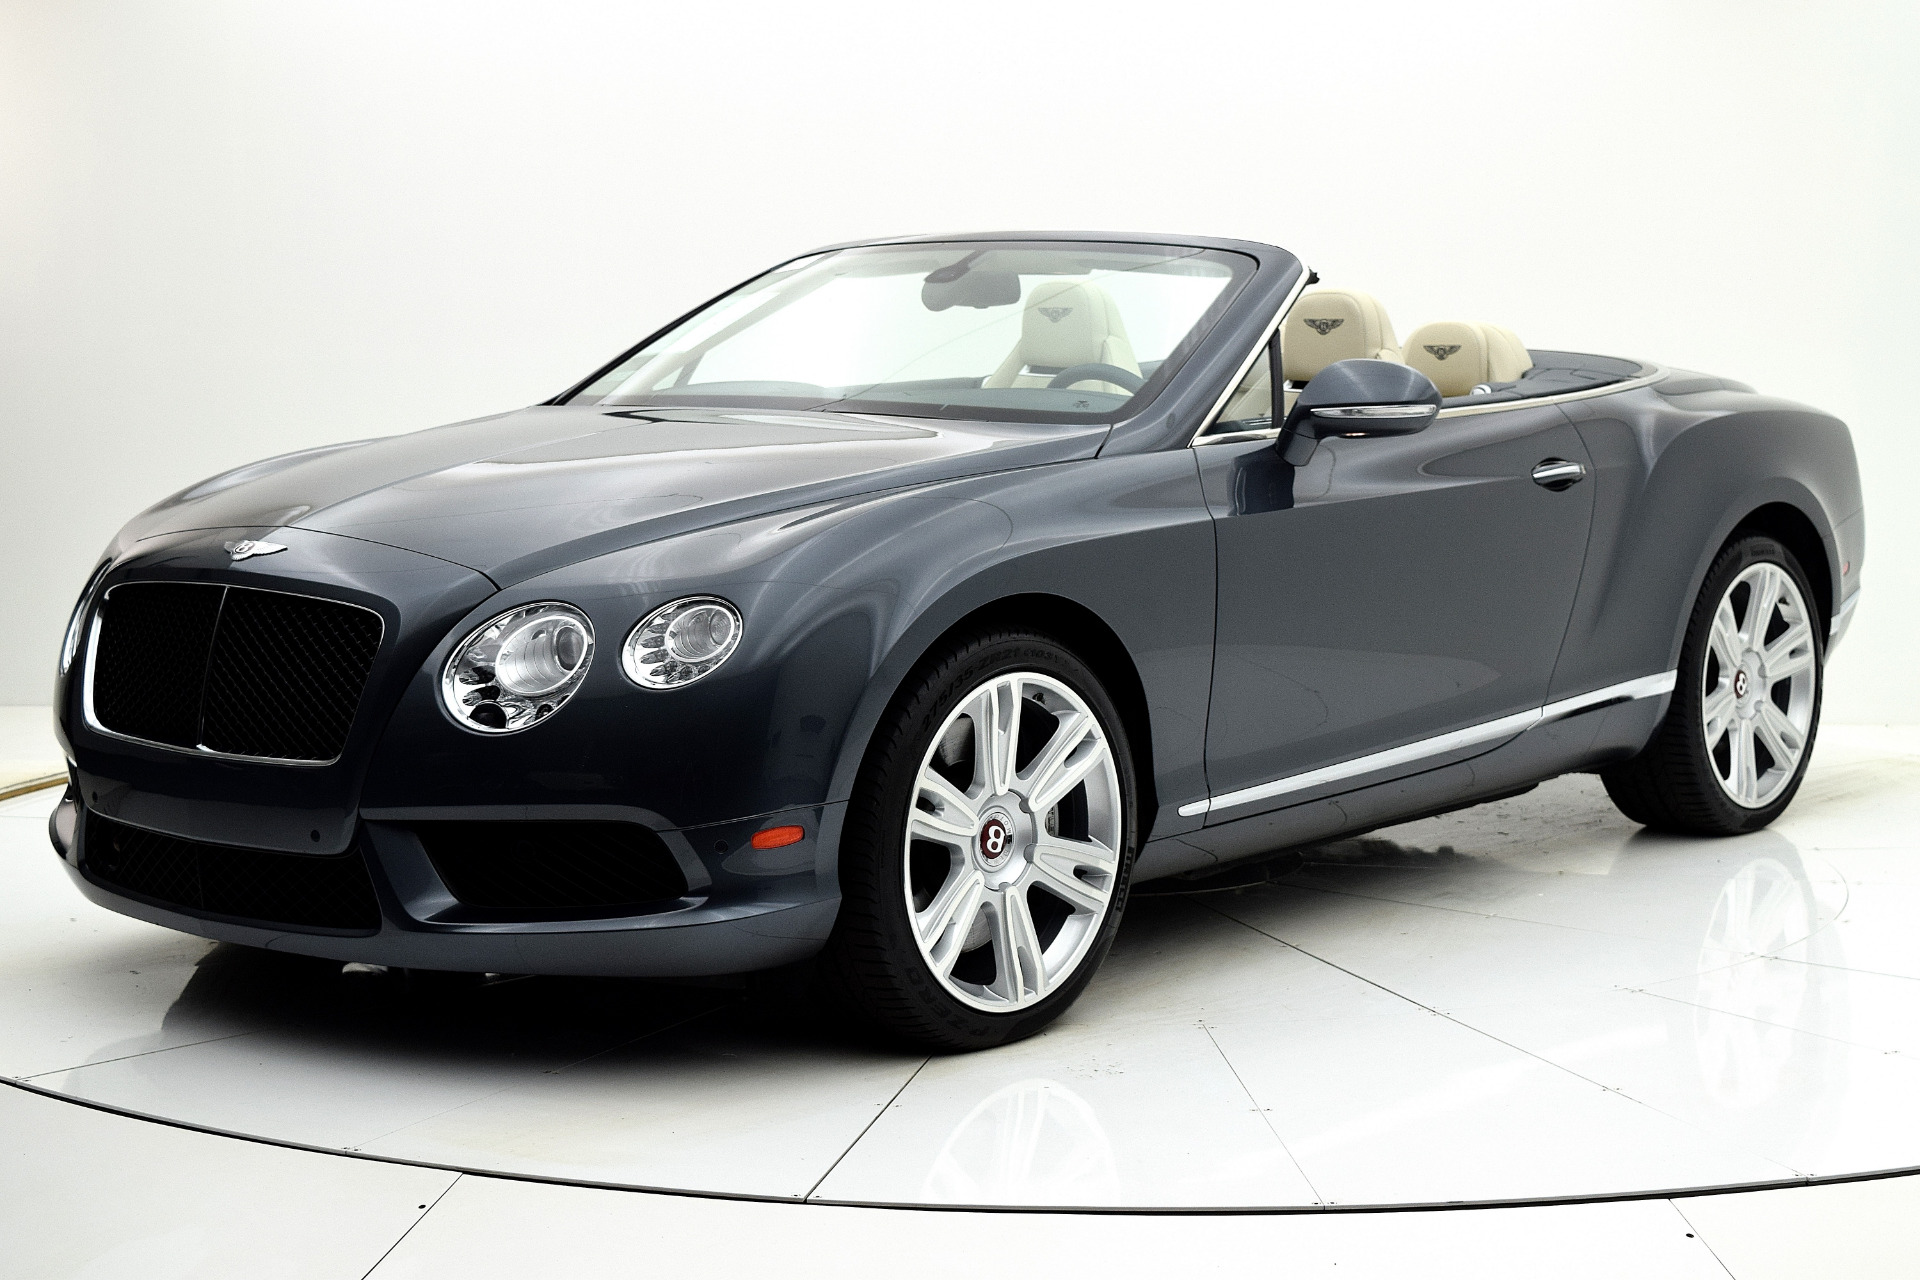 Used 2013 Bentley Continental GT V8 Convertible for sale Sold at F.C. Kerbeck Aston Martin in Palmyra NJ 08065 2